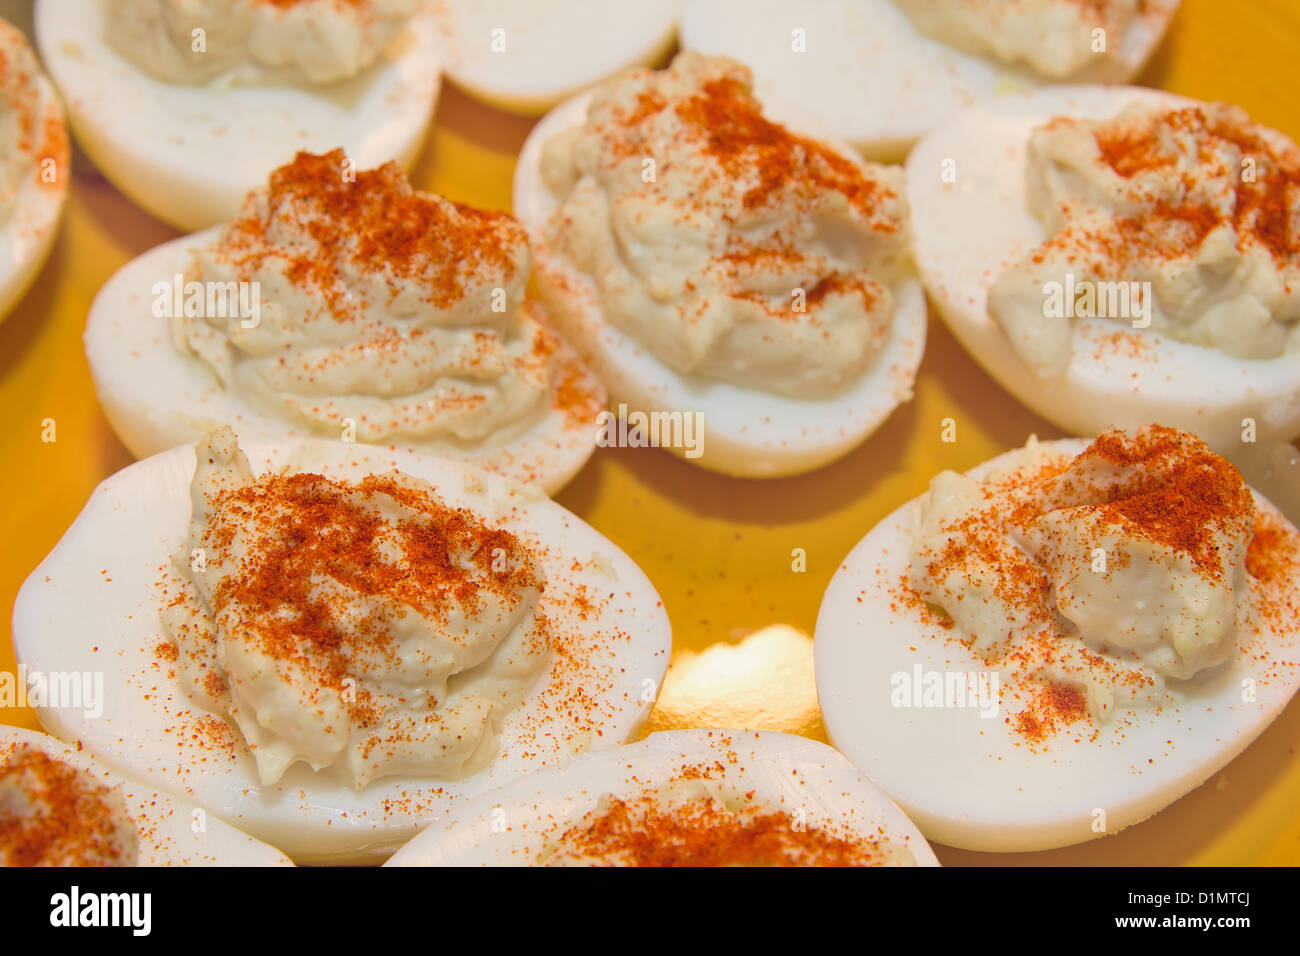 Plate of Deviled Eggs Hors D'Oeuvre sprinkled with Paprika Spice Closeup Stock Photo